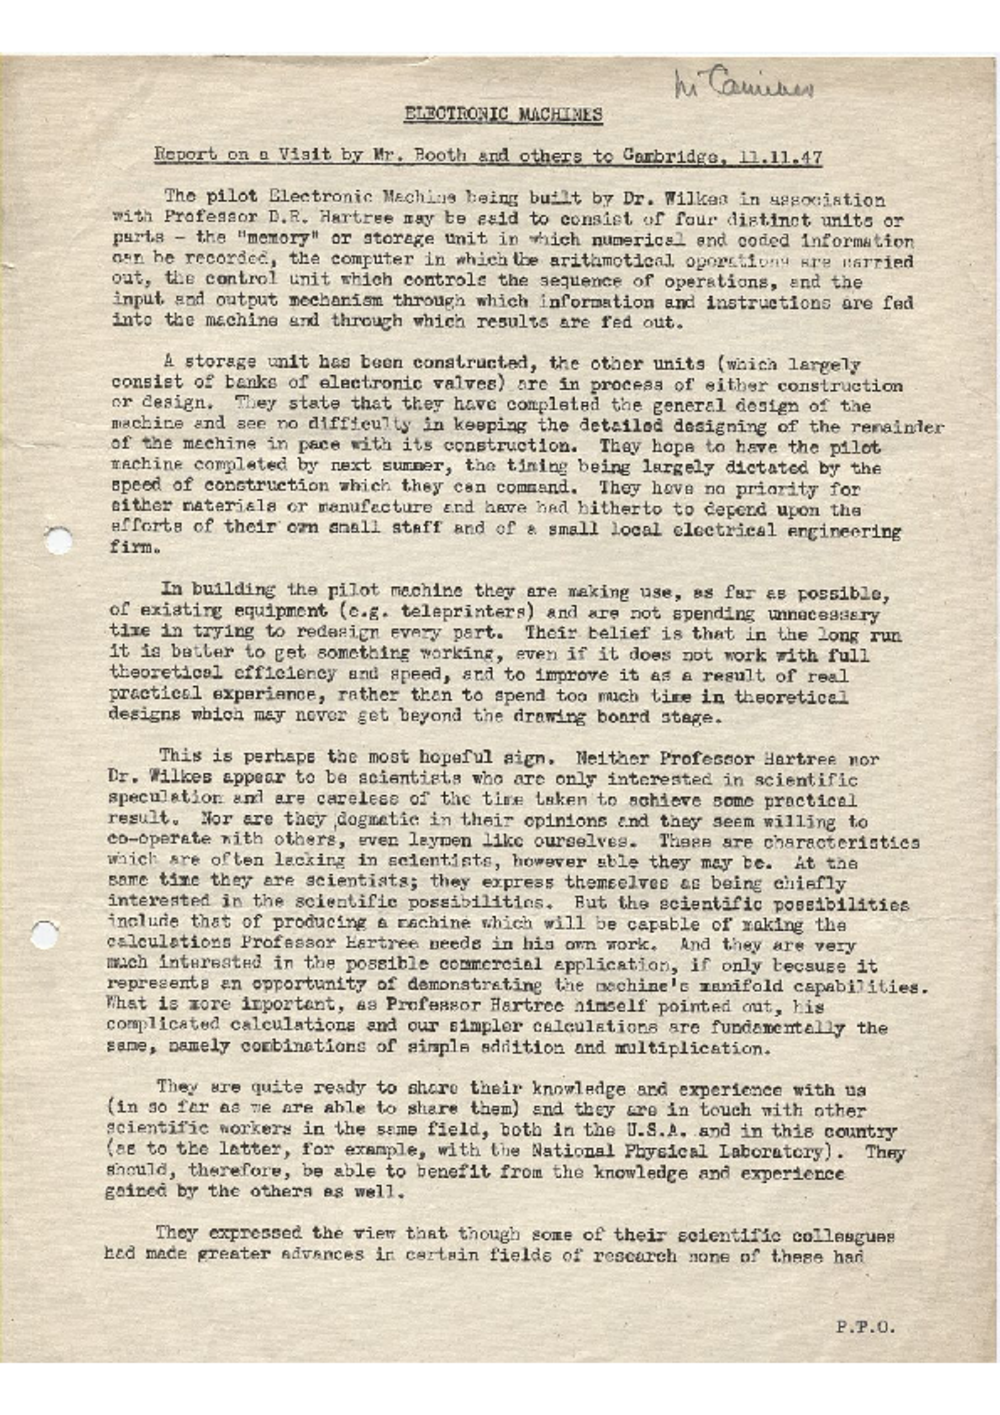 Article: 54869 Electronic Machines - Report on a Visit by Mr Booth and others to Cambridge, Nov 1947